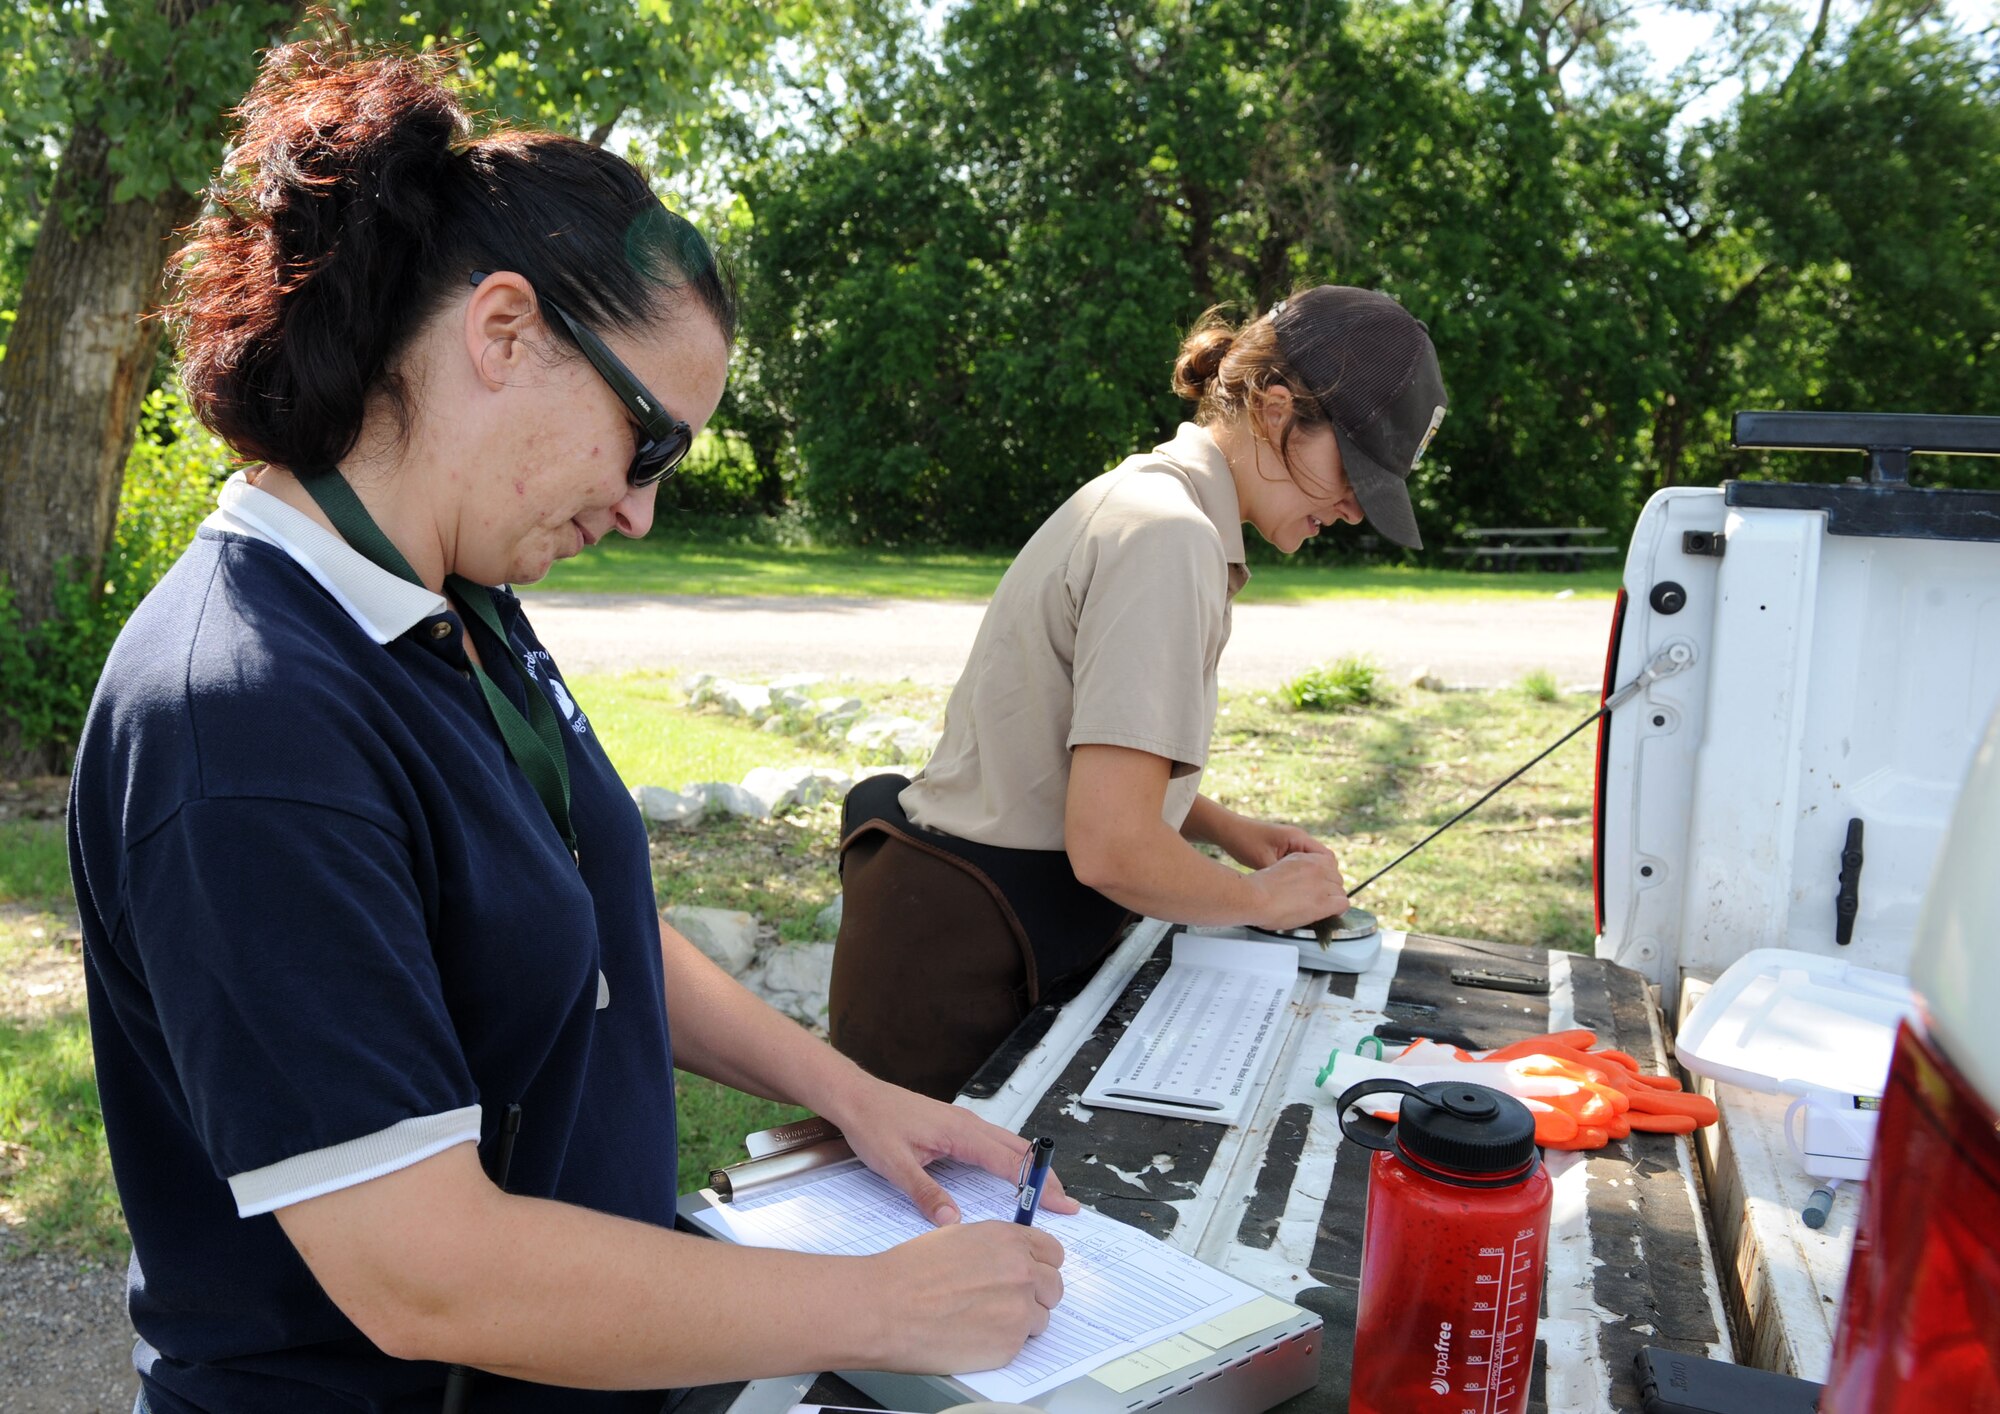 Lauren Caister, Bird/Wildlife Aircraft Strike Hazard program manager, helps catalog fish size and weight with a U.S. Fish and Wildlife Service biologist, July 15, 2015, at McConnell Air Force Base, Kan. The two programs work together to prevent the spread of invasive species and control wildlife population. (U.S. Air Force photo by Senior Airman David Bernal Del Agua)